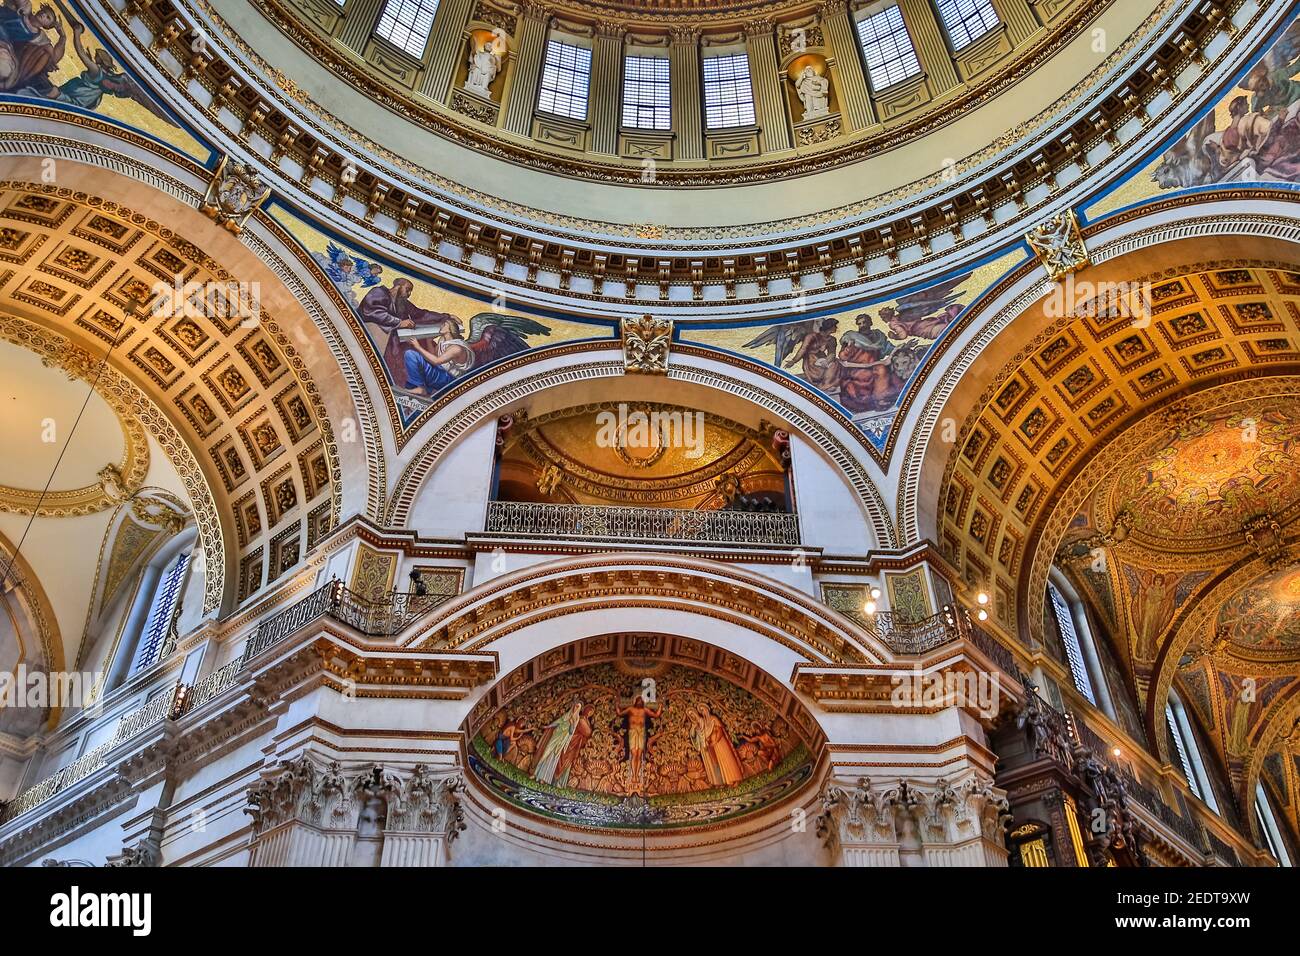 St Paul's Cathedral interior, view up to painted ceiling carvings and gilded decorations of the inner dome, London, England Stock Photo